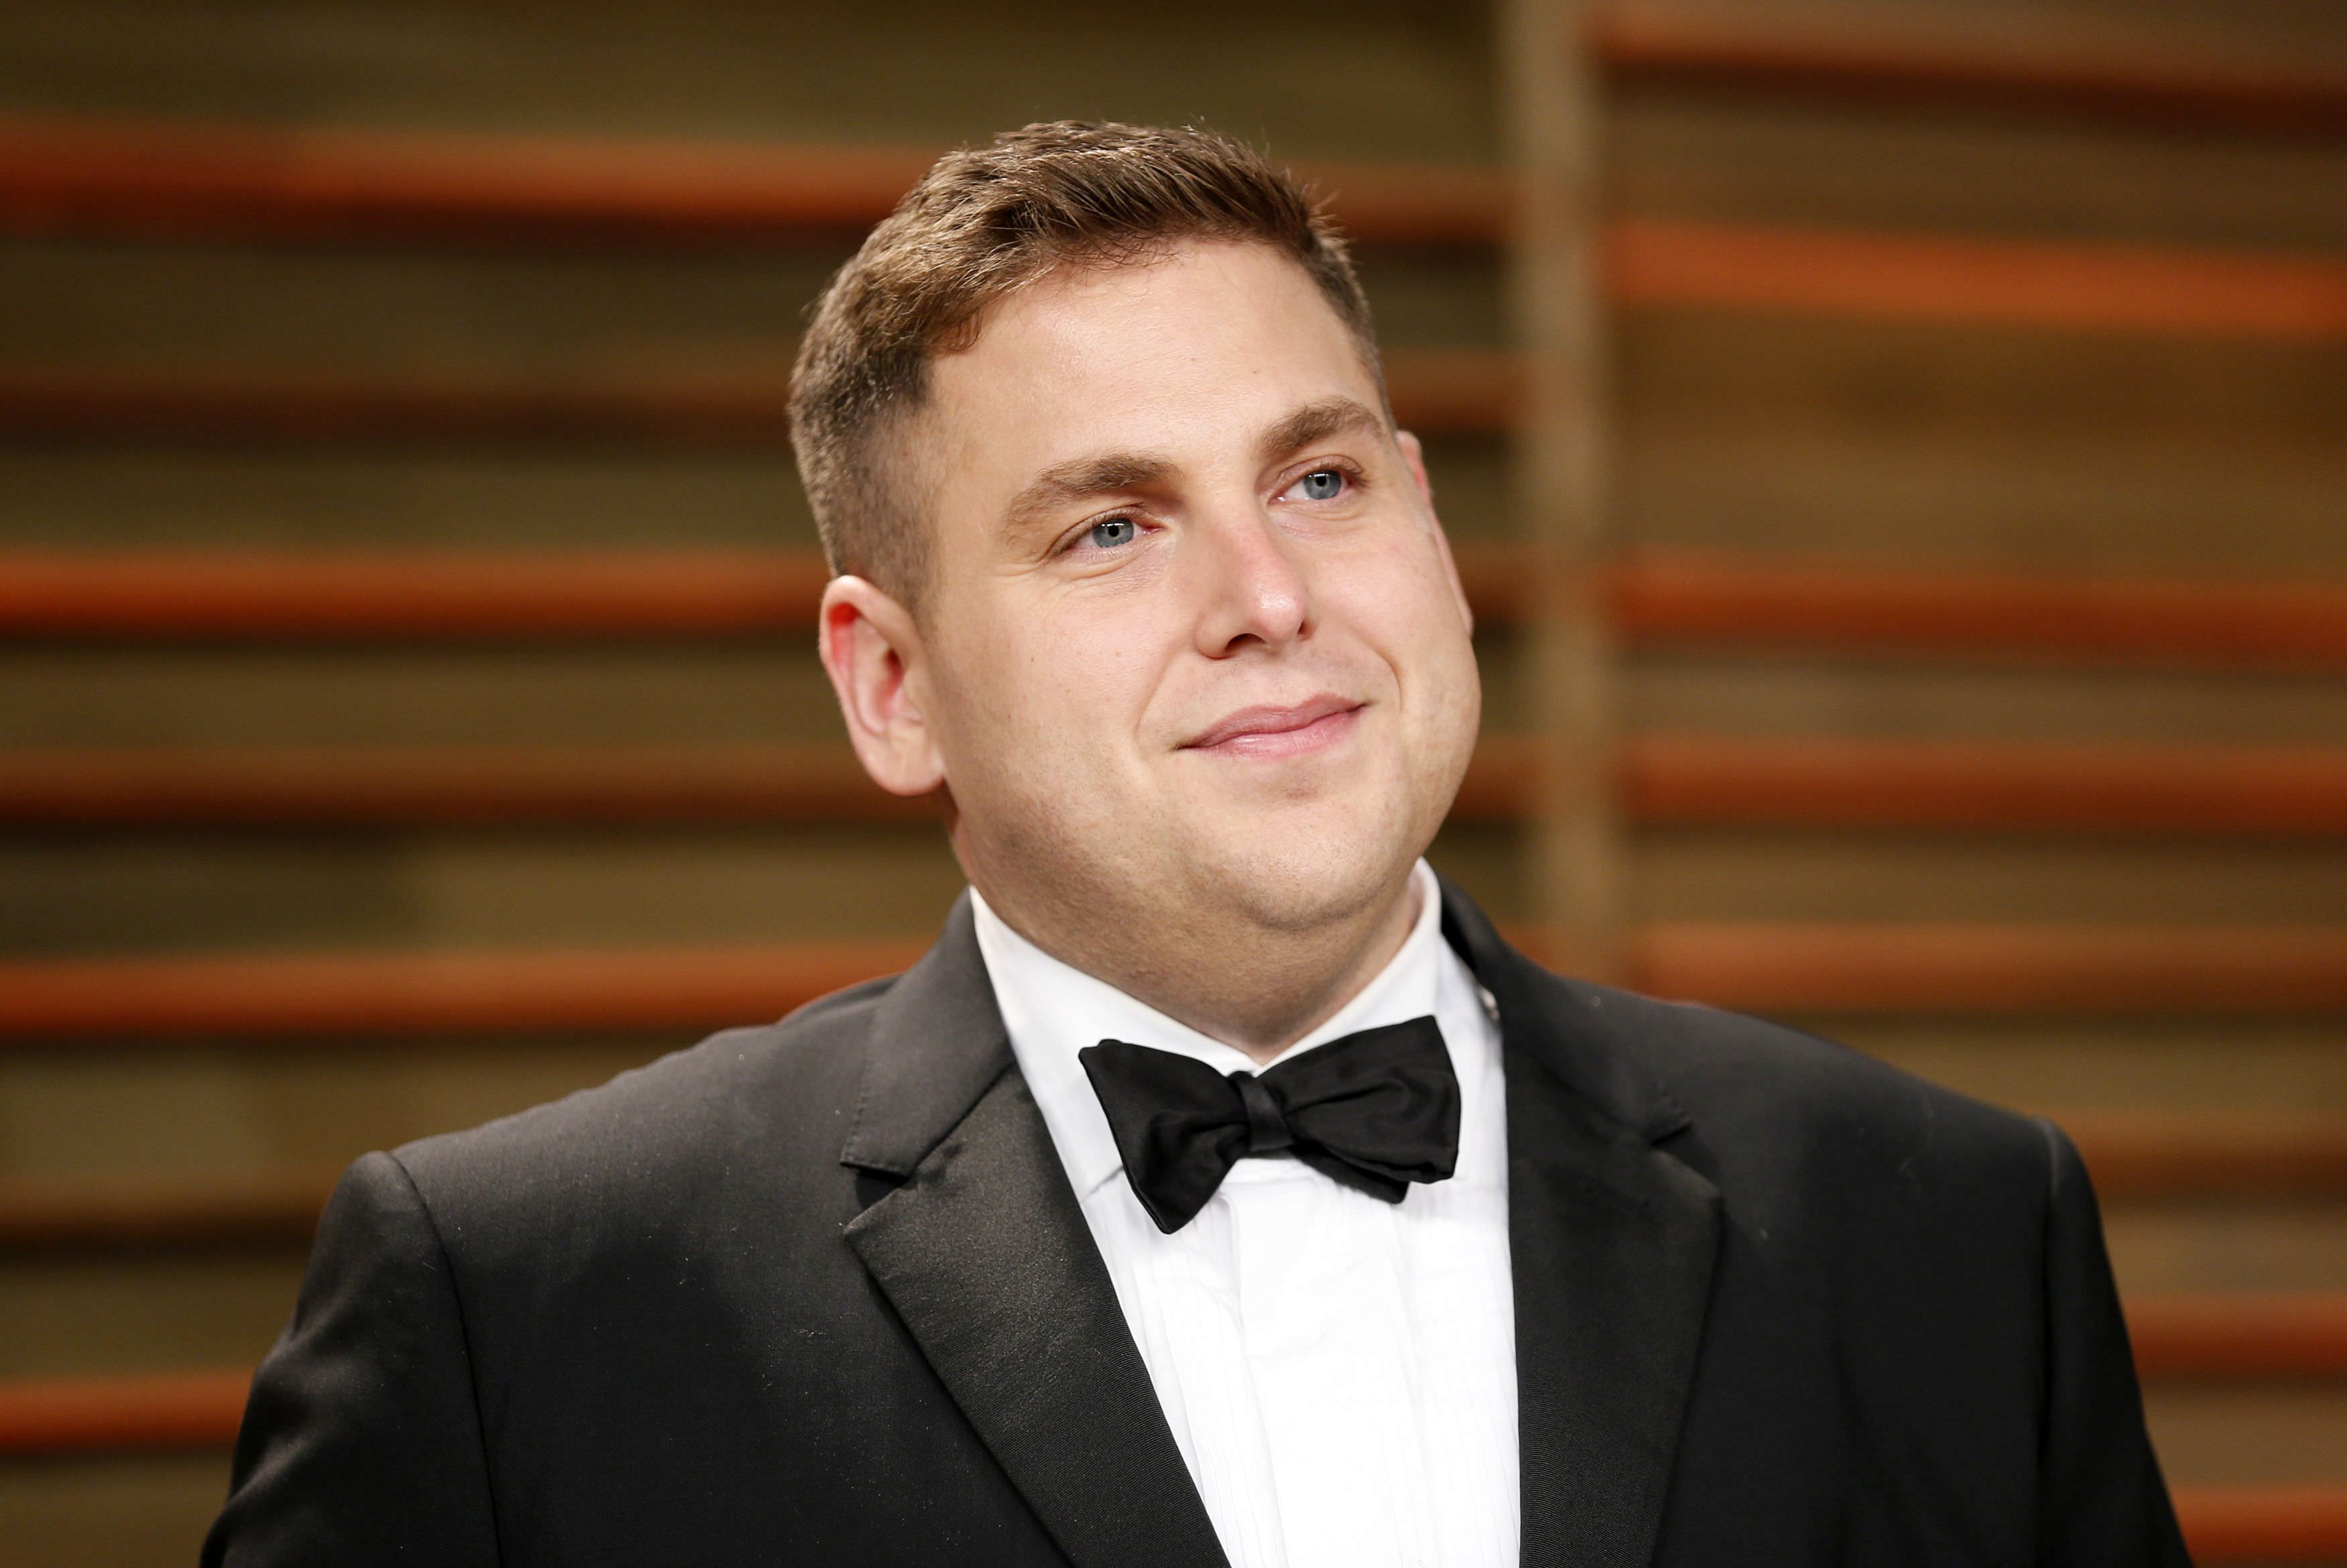 Jonah Hill is Jumping To a Different Street!